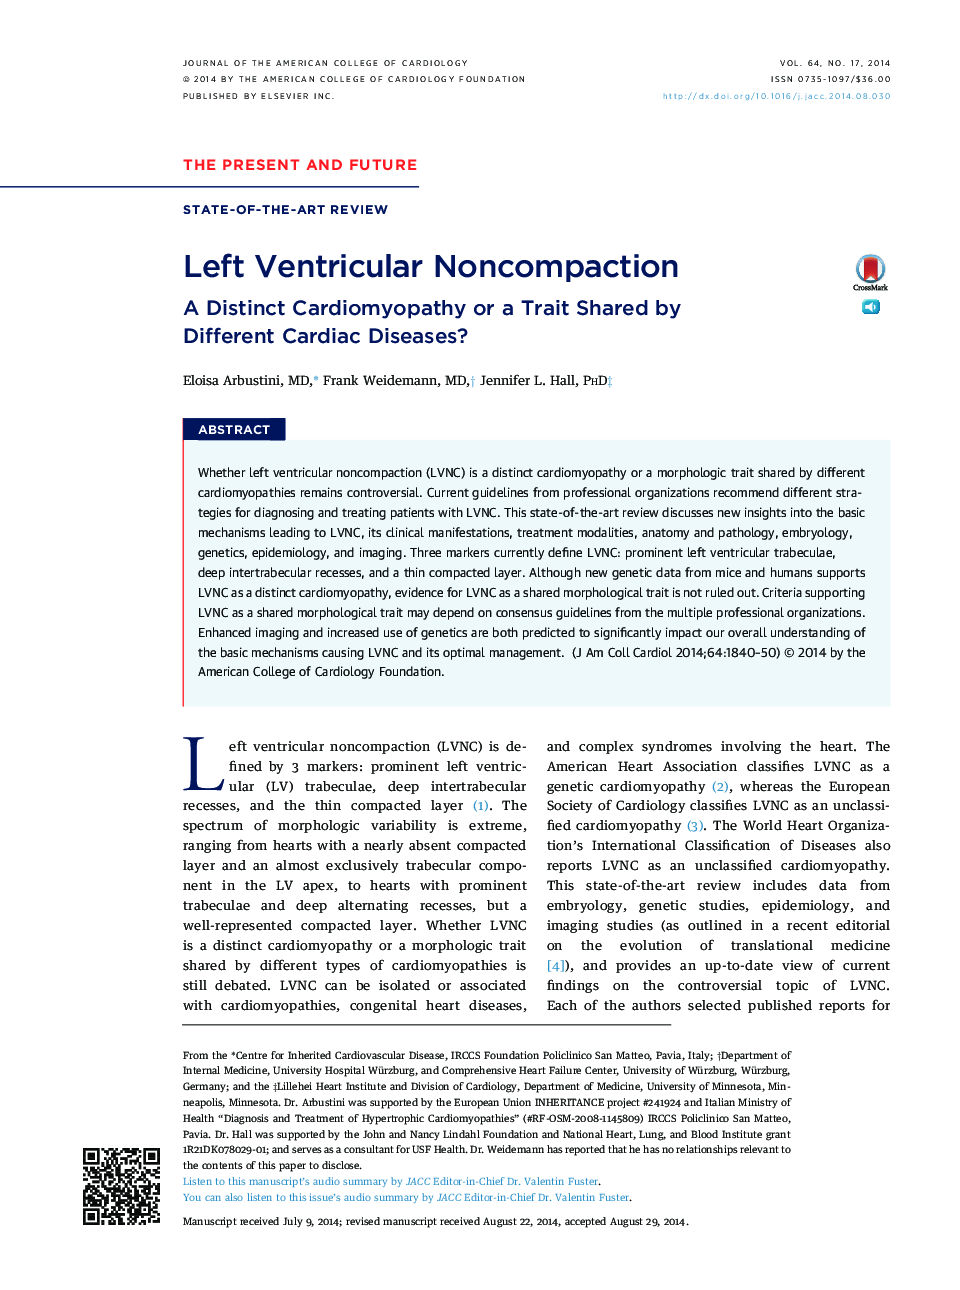 Left Ventricular Noncompaction : A Distinct Cardiomyopathy or a Trait Shared by Different Cardiac Diseases?